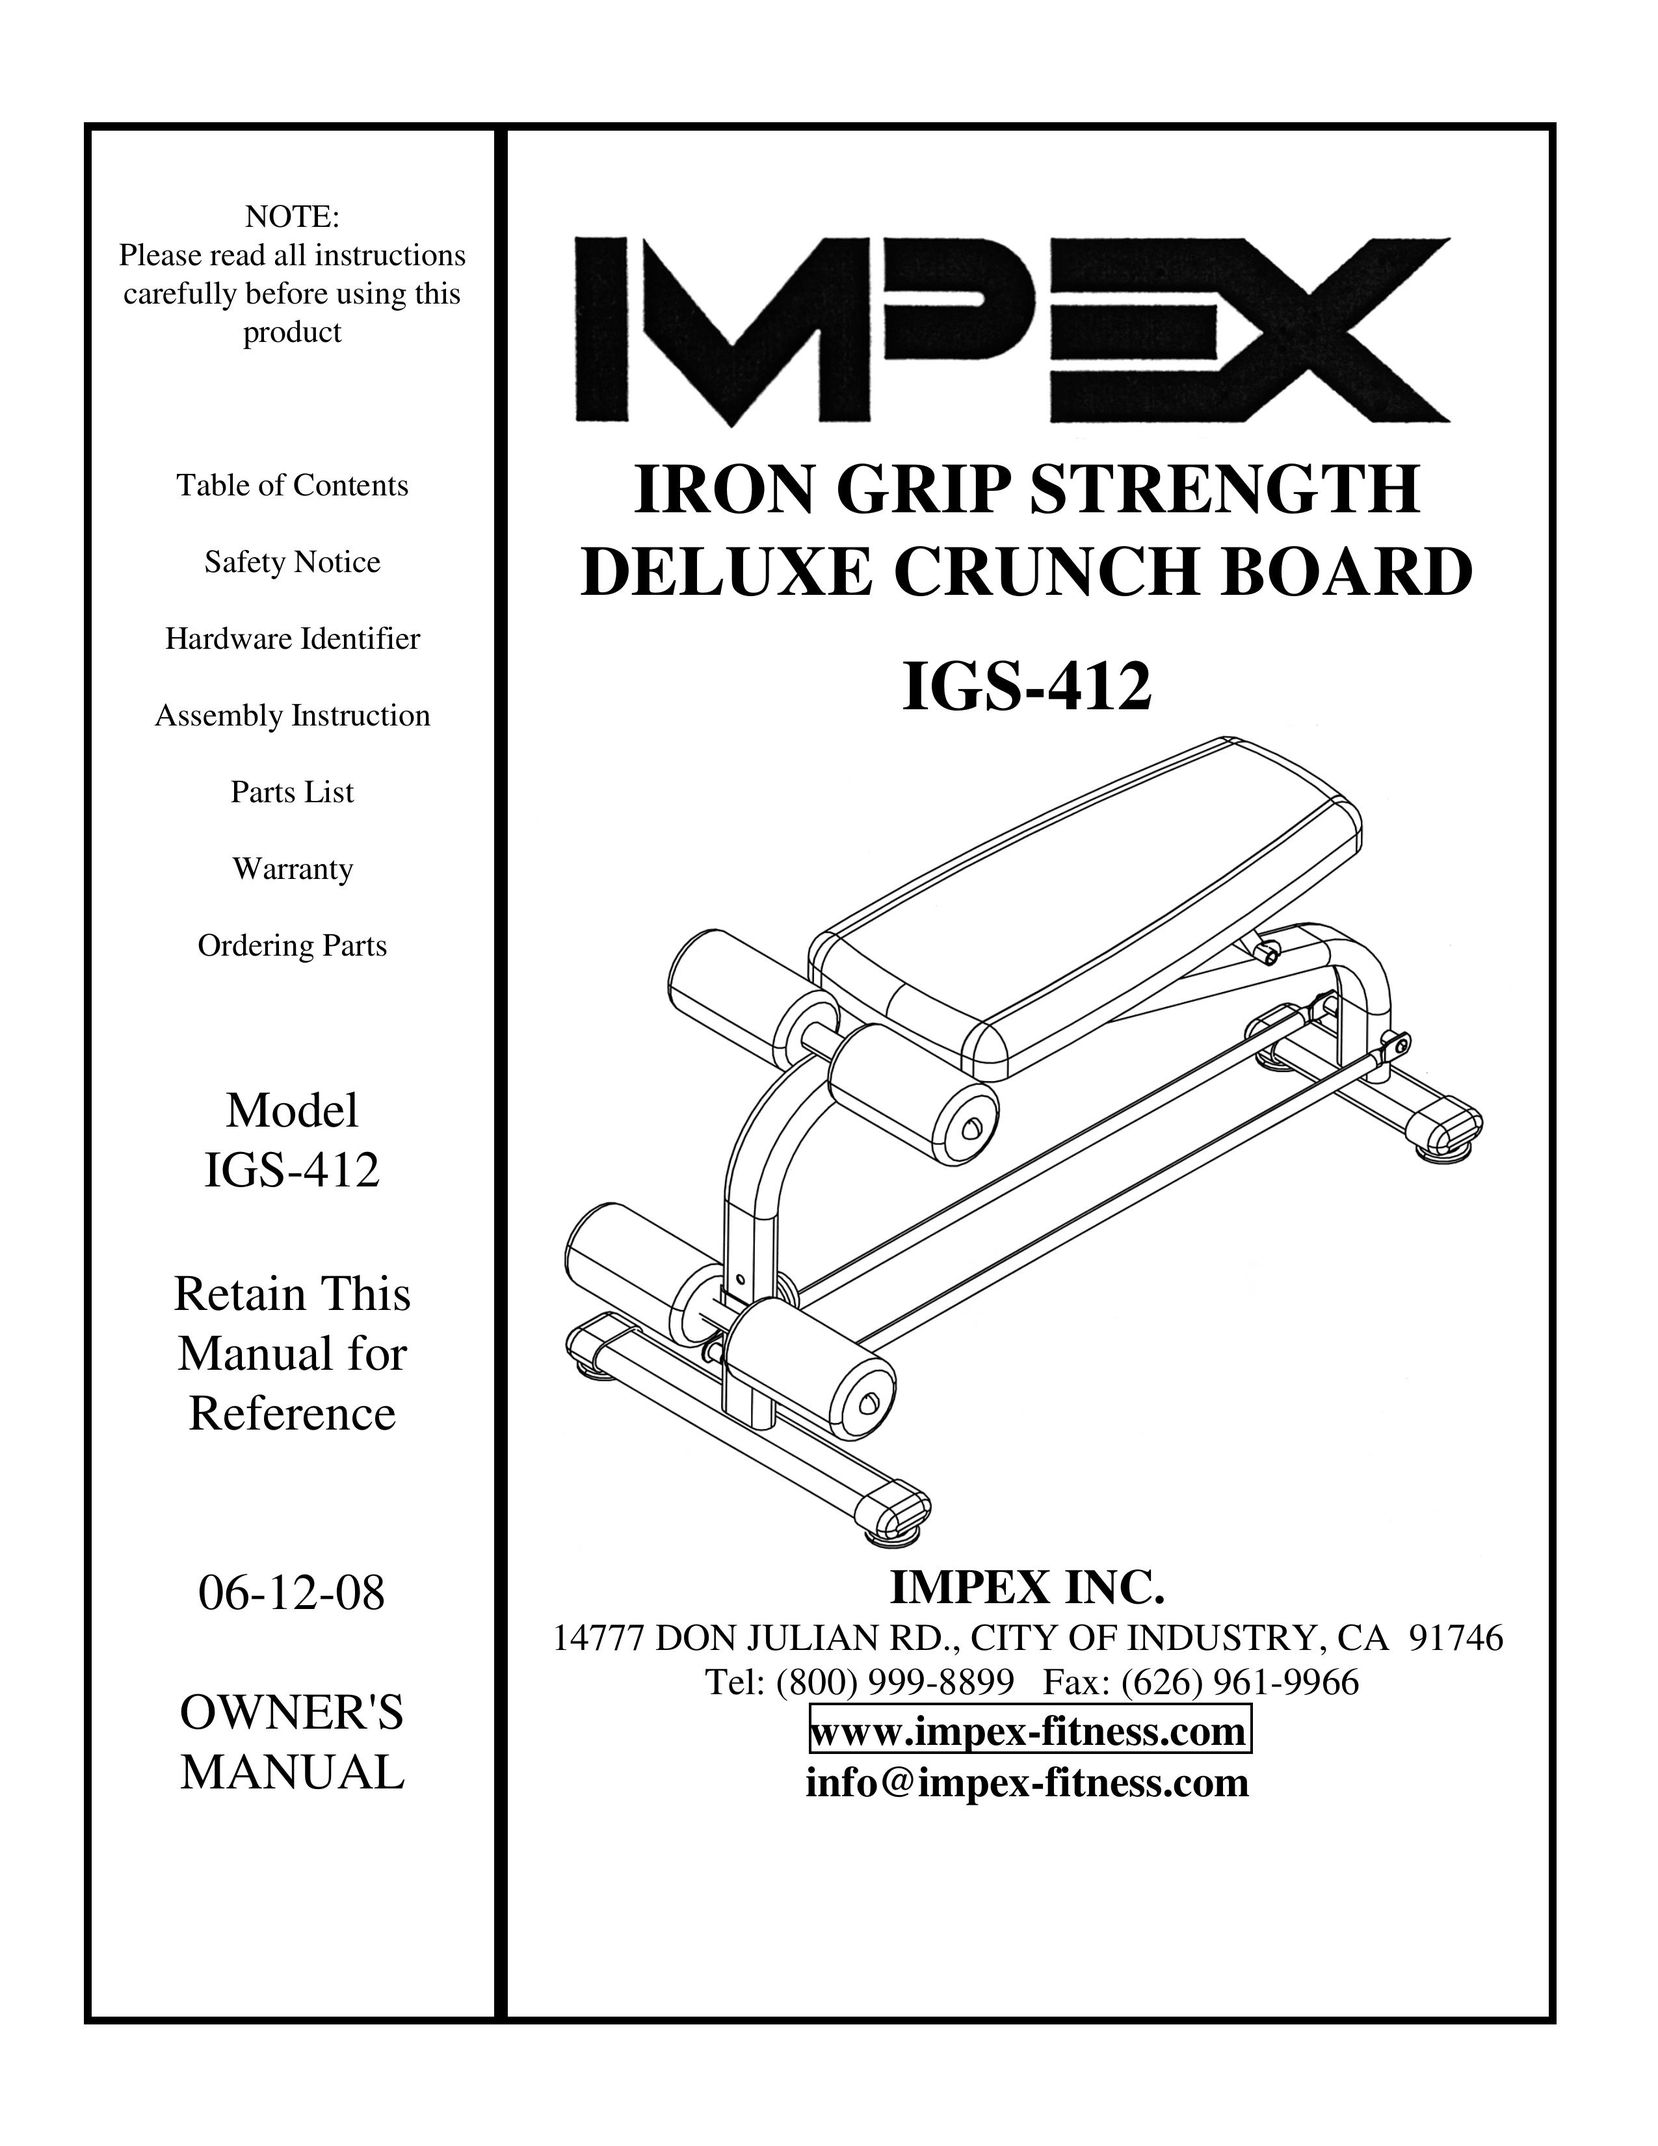 Impex IGS-412 Home Gym User Manual